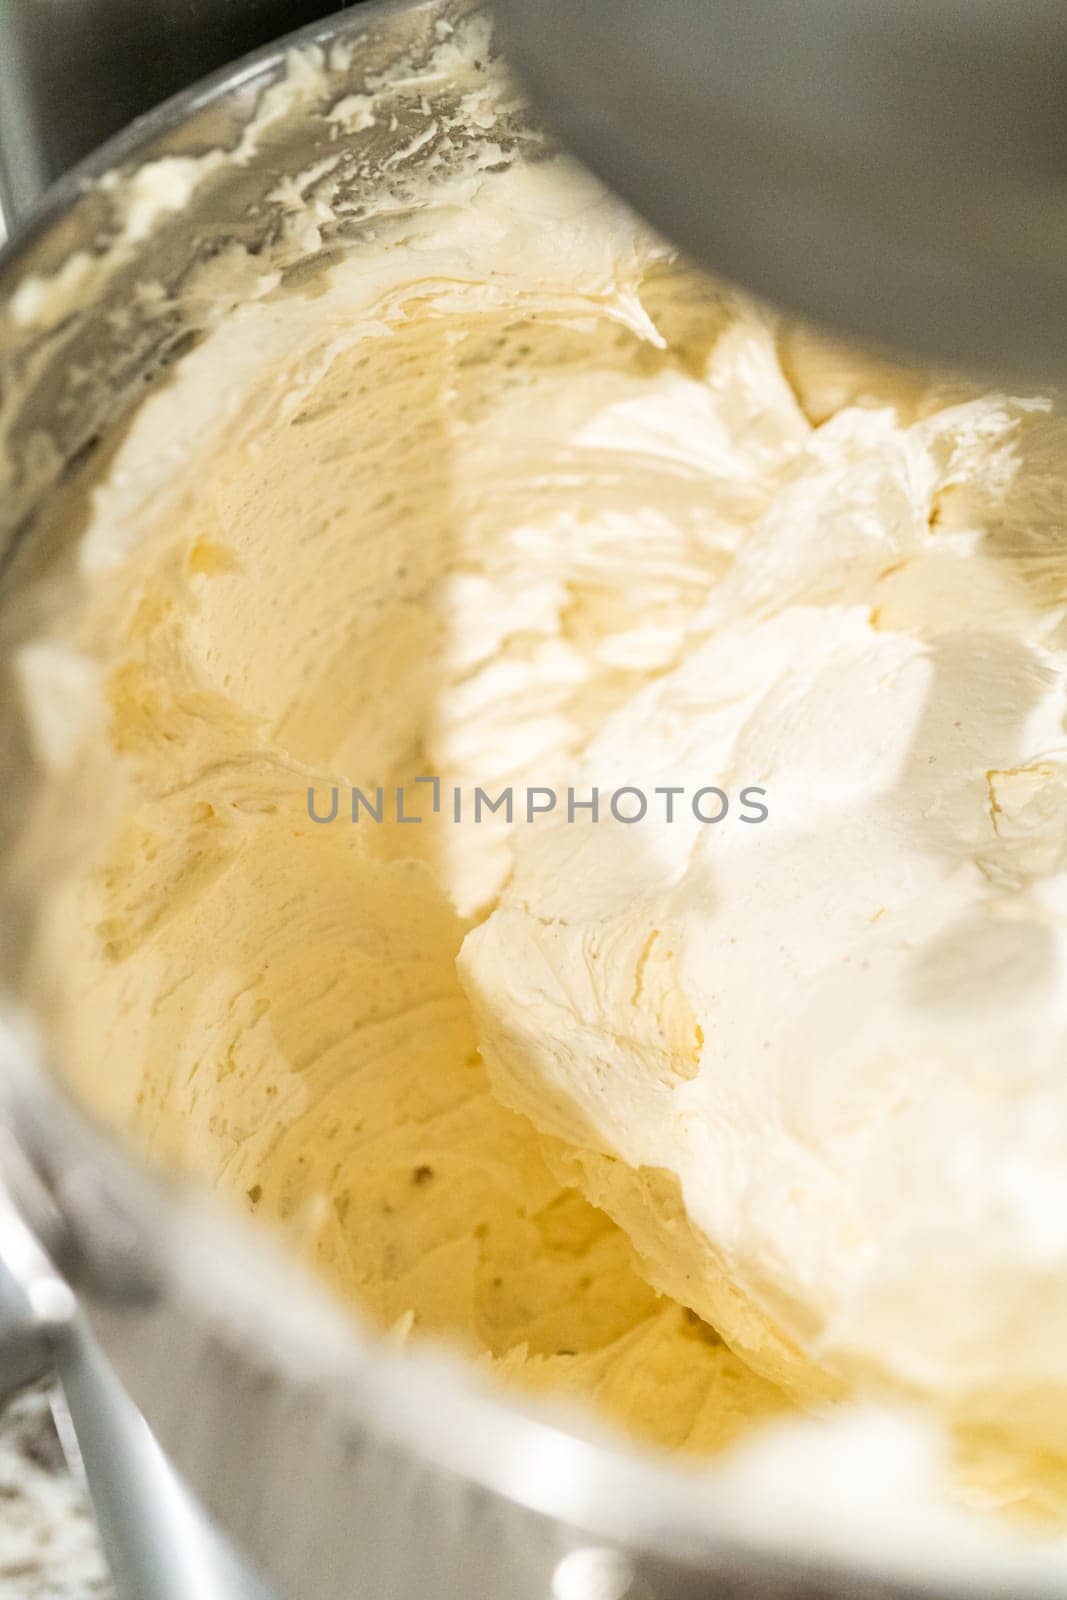 Creamy Buttercream Frosting Whipped in Stand Mixer Bowl by arinahabich